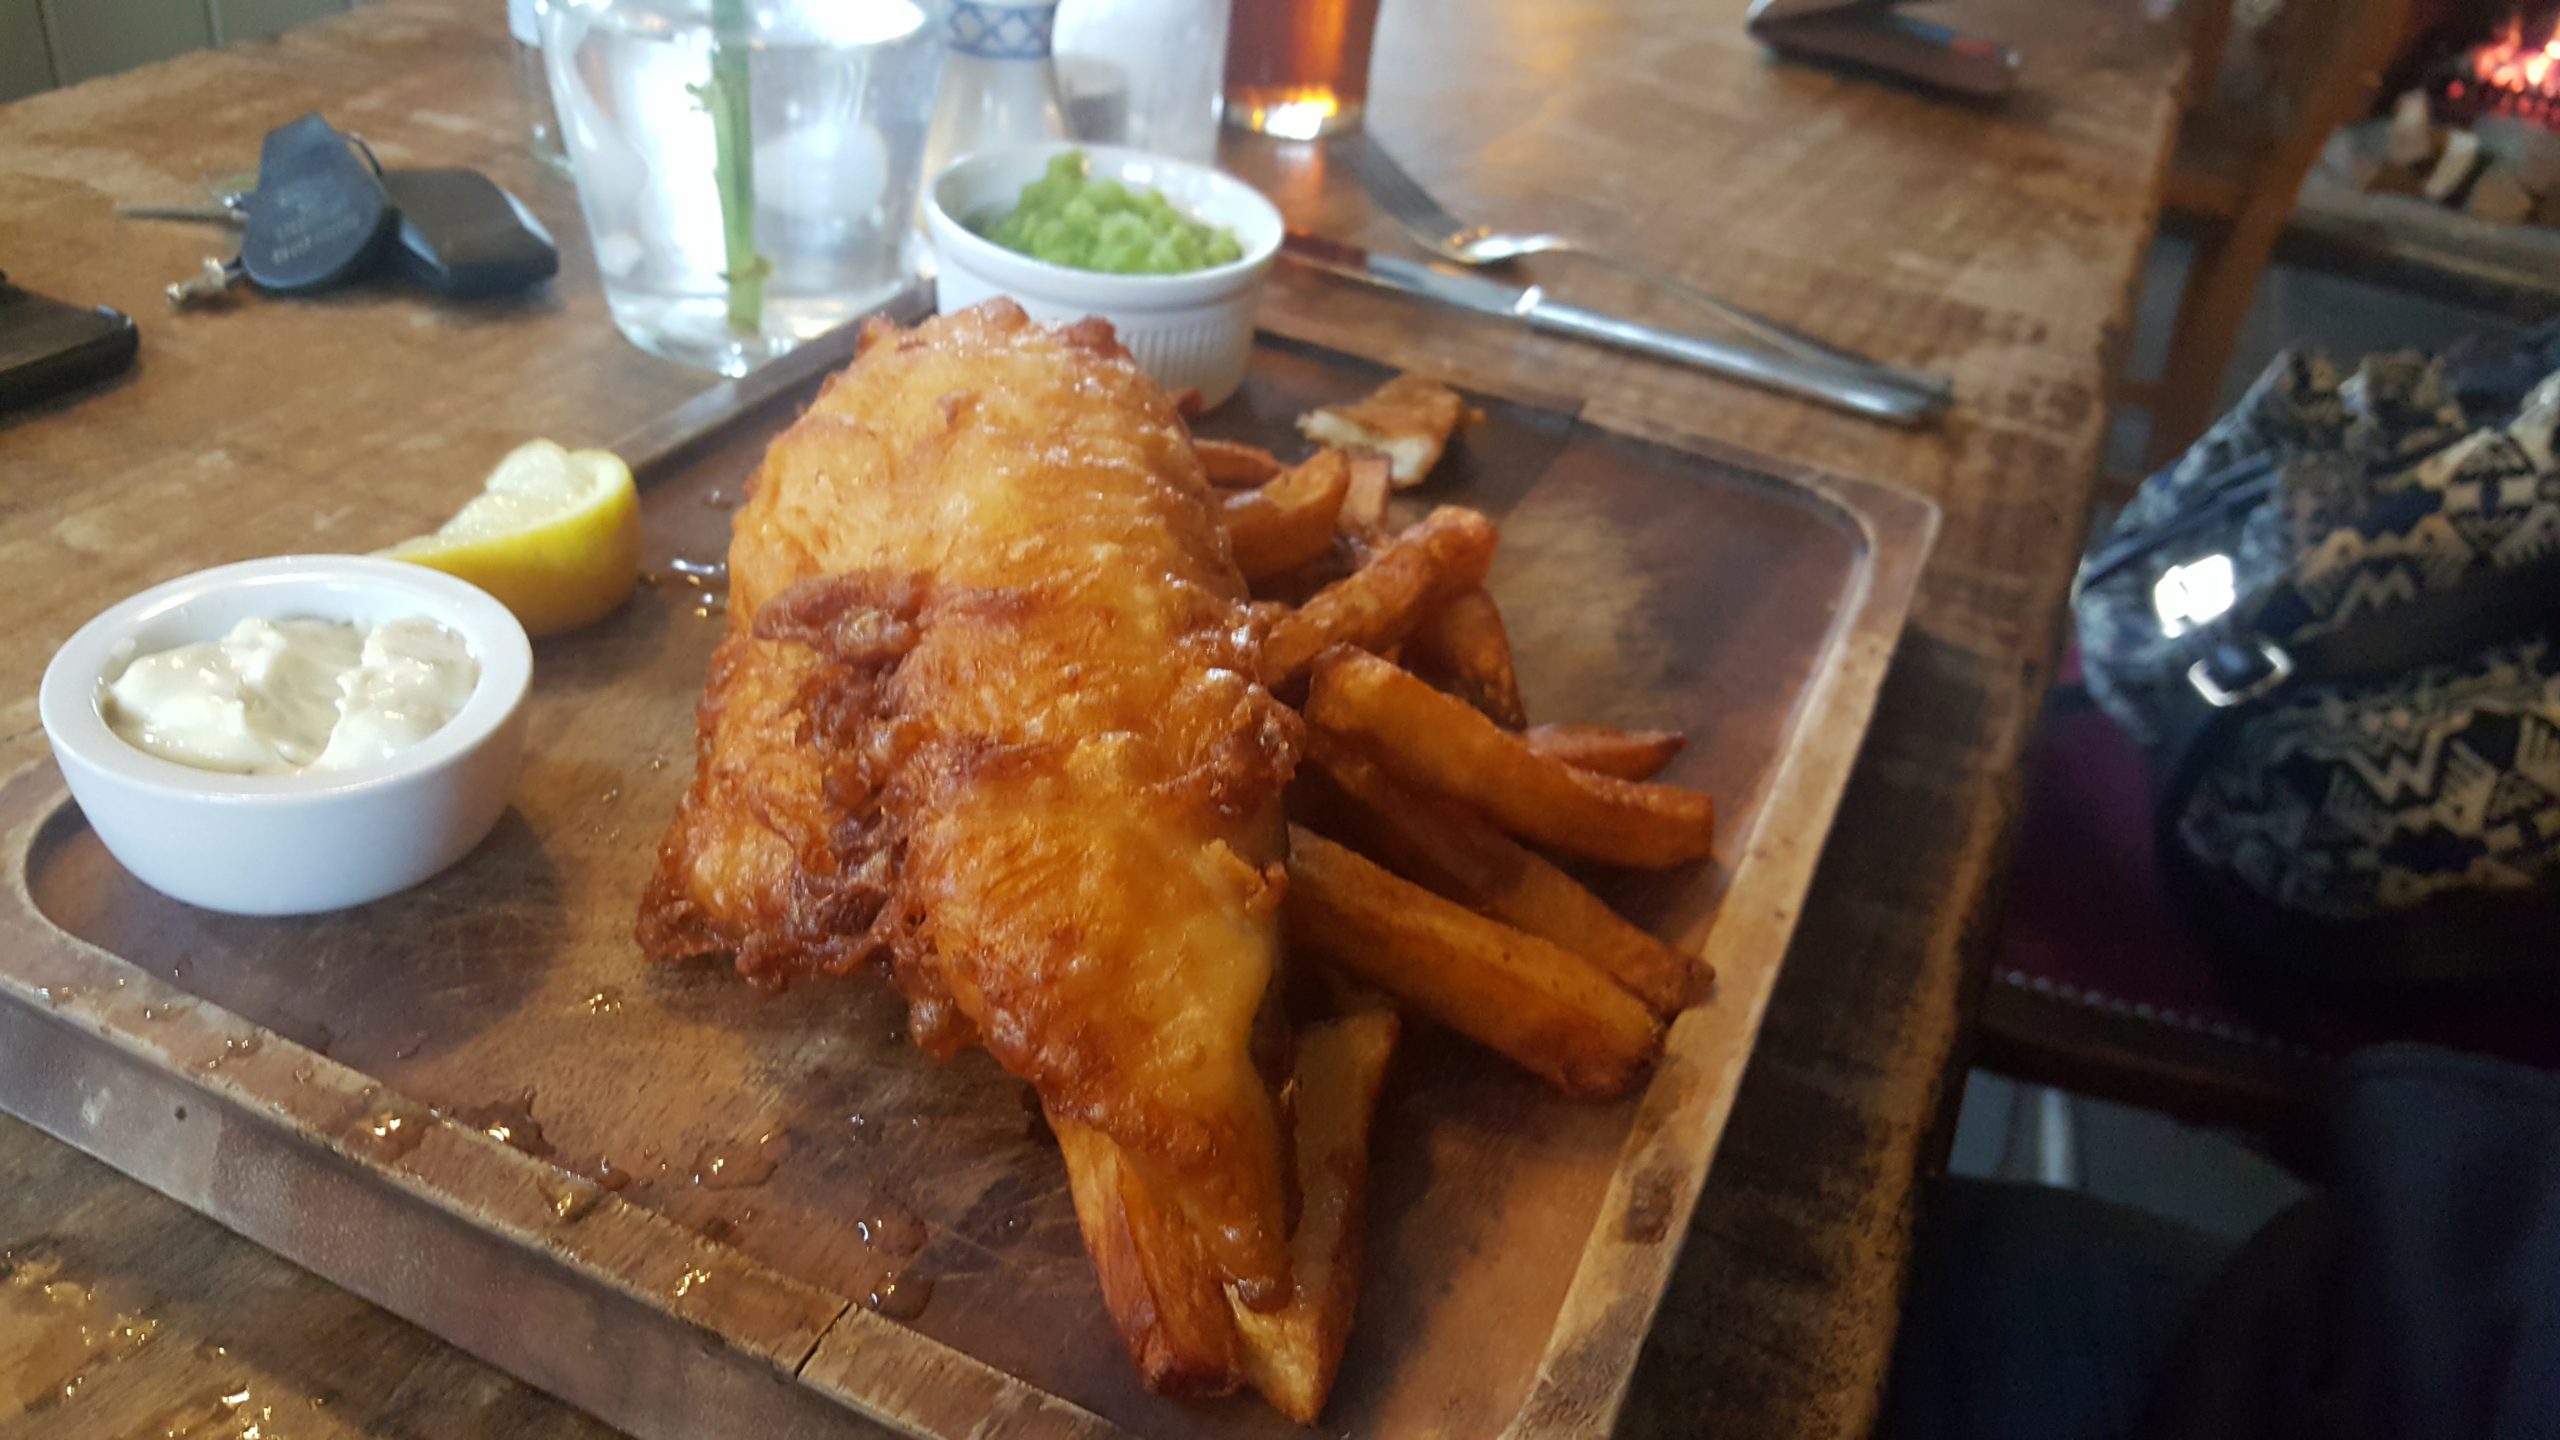 England style Fish and Chips